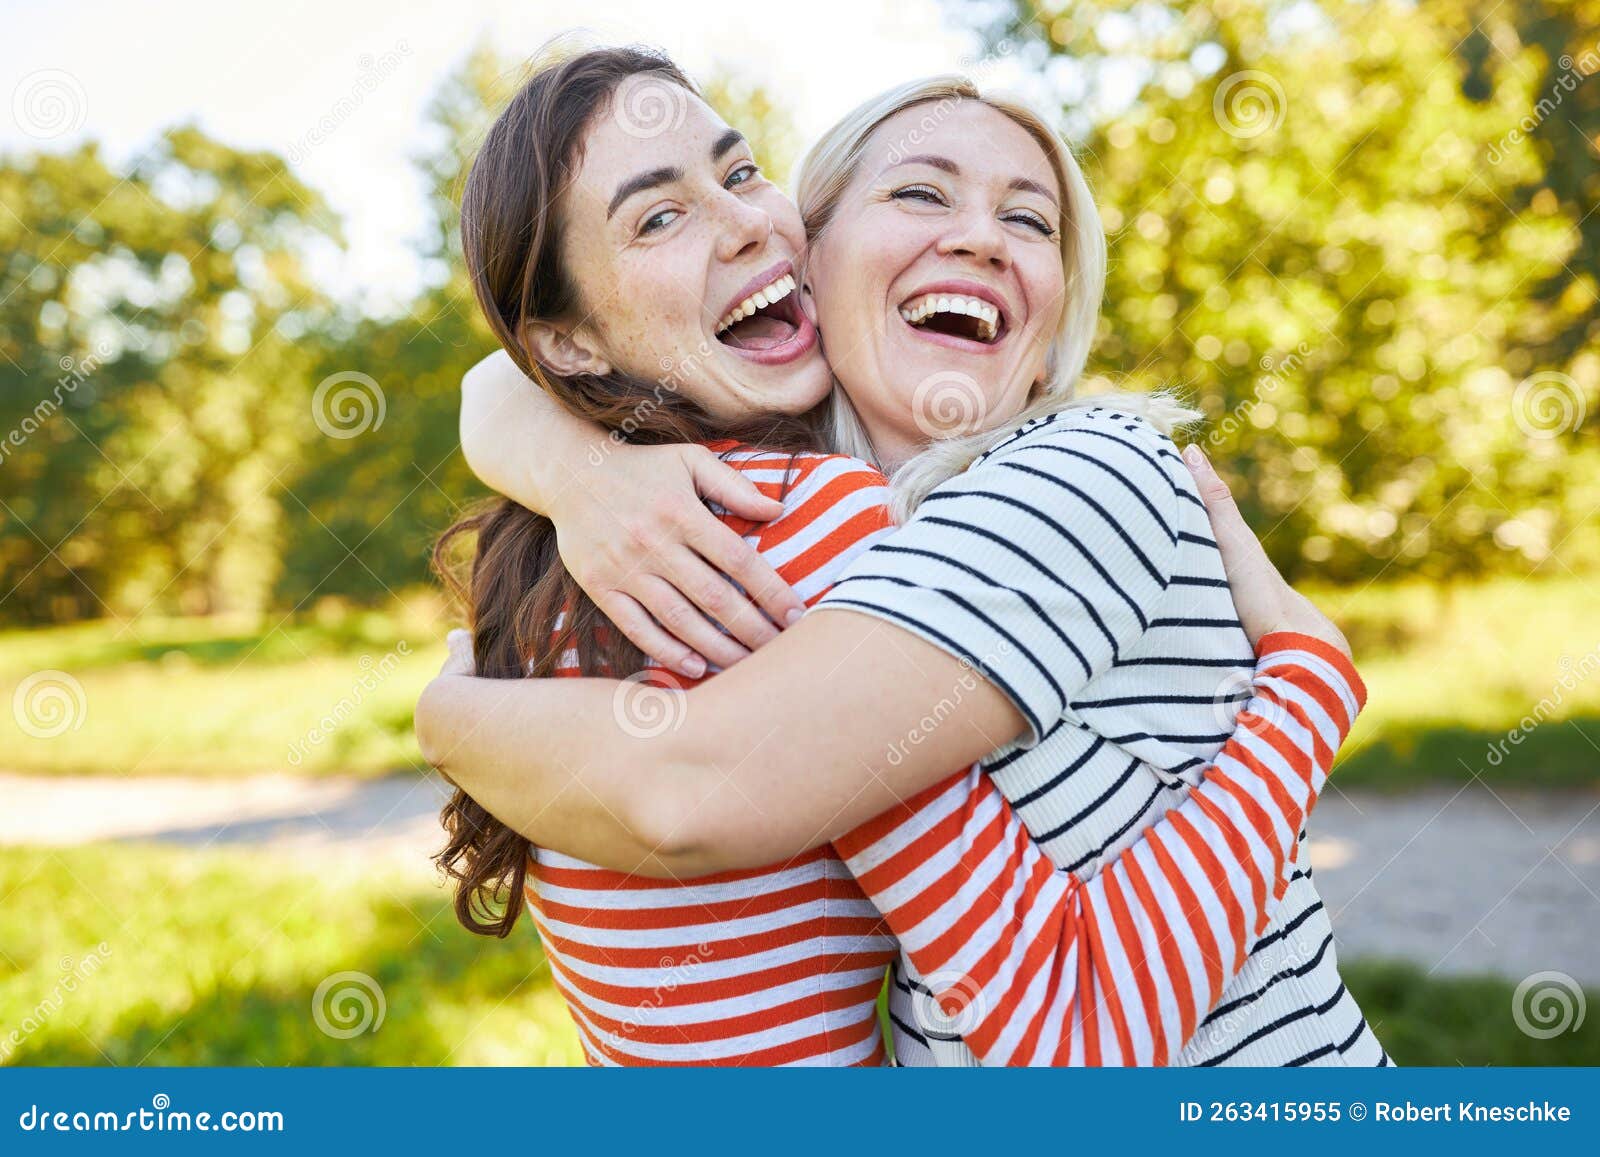 Two Laughing Friends Hug Each Other In Nature Stock Image Image Of